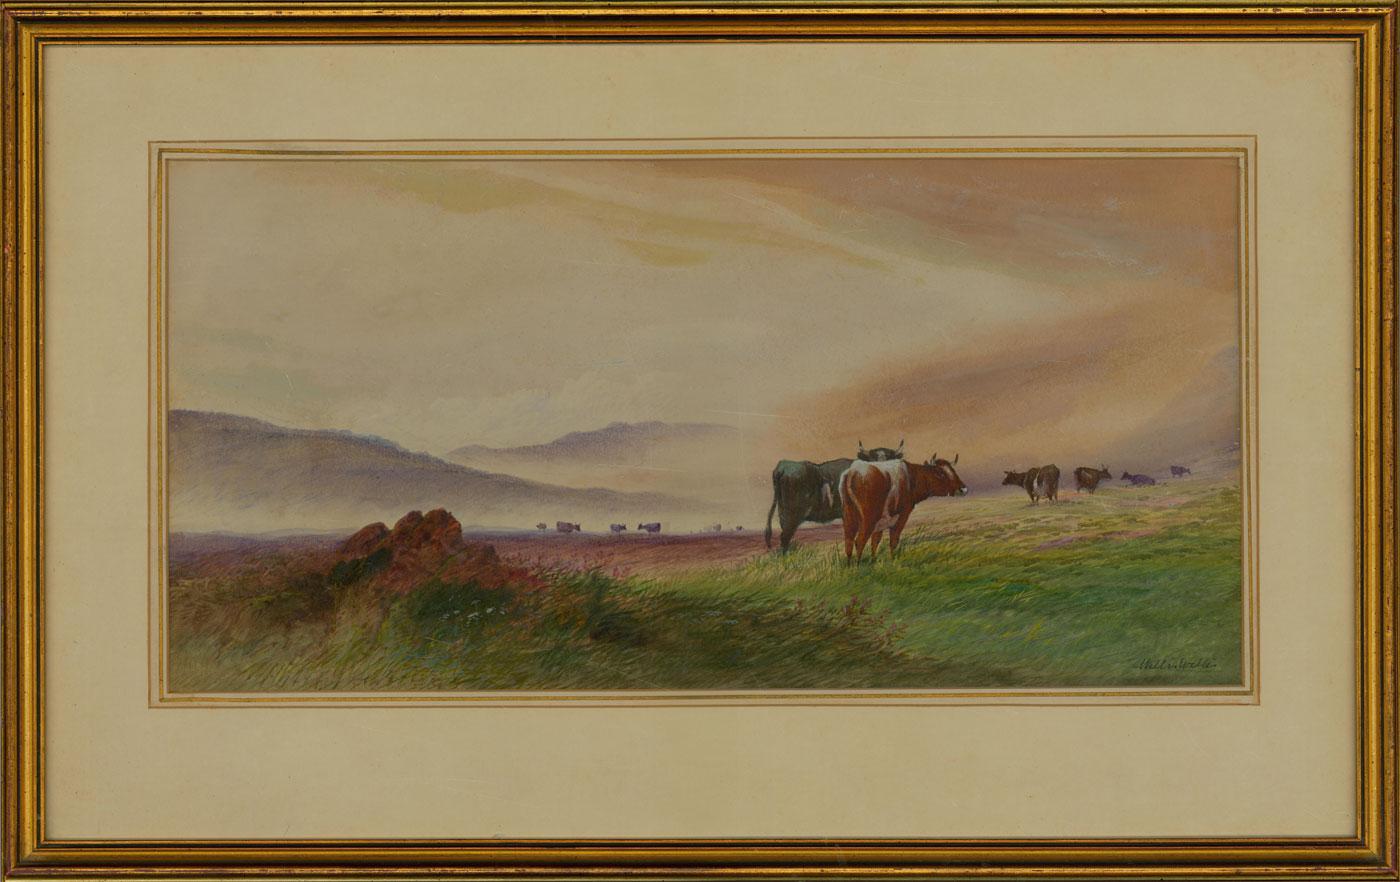 Unknown Landscape Art - Willis Willis - Signed & Framed Mid 20th Century Watercolour, Heath With Cattle